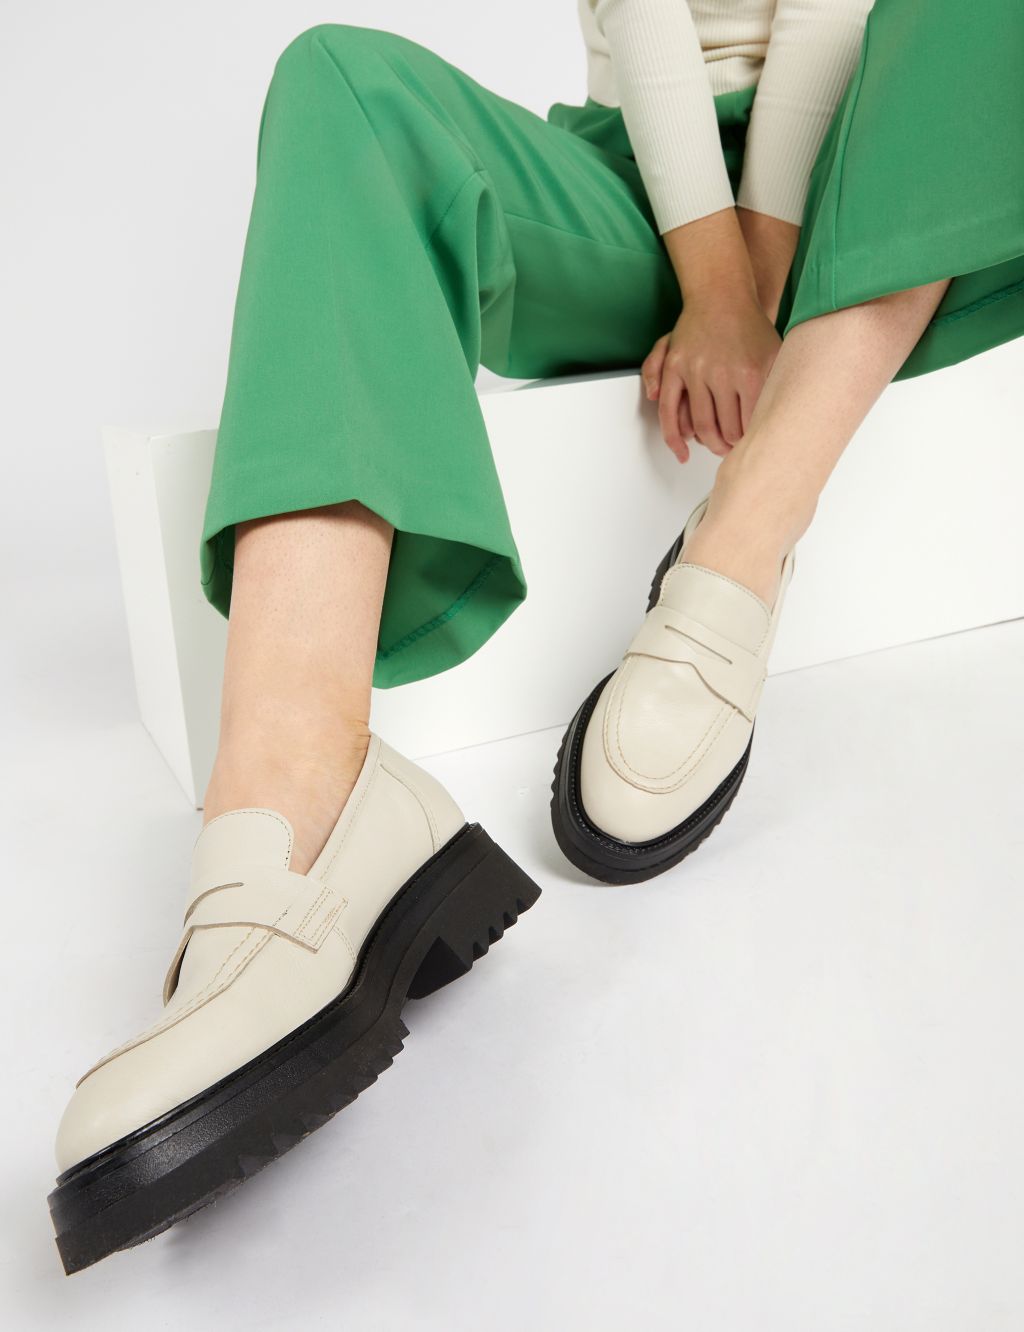 Leather Flat Loafers image 1